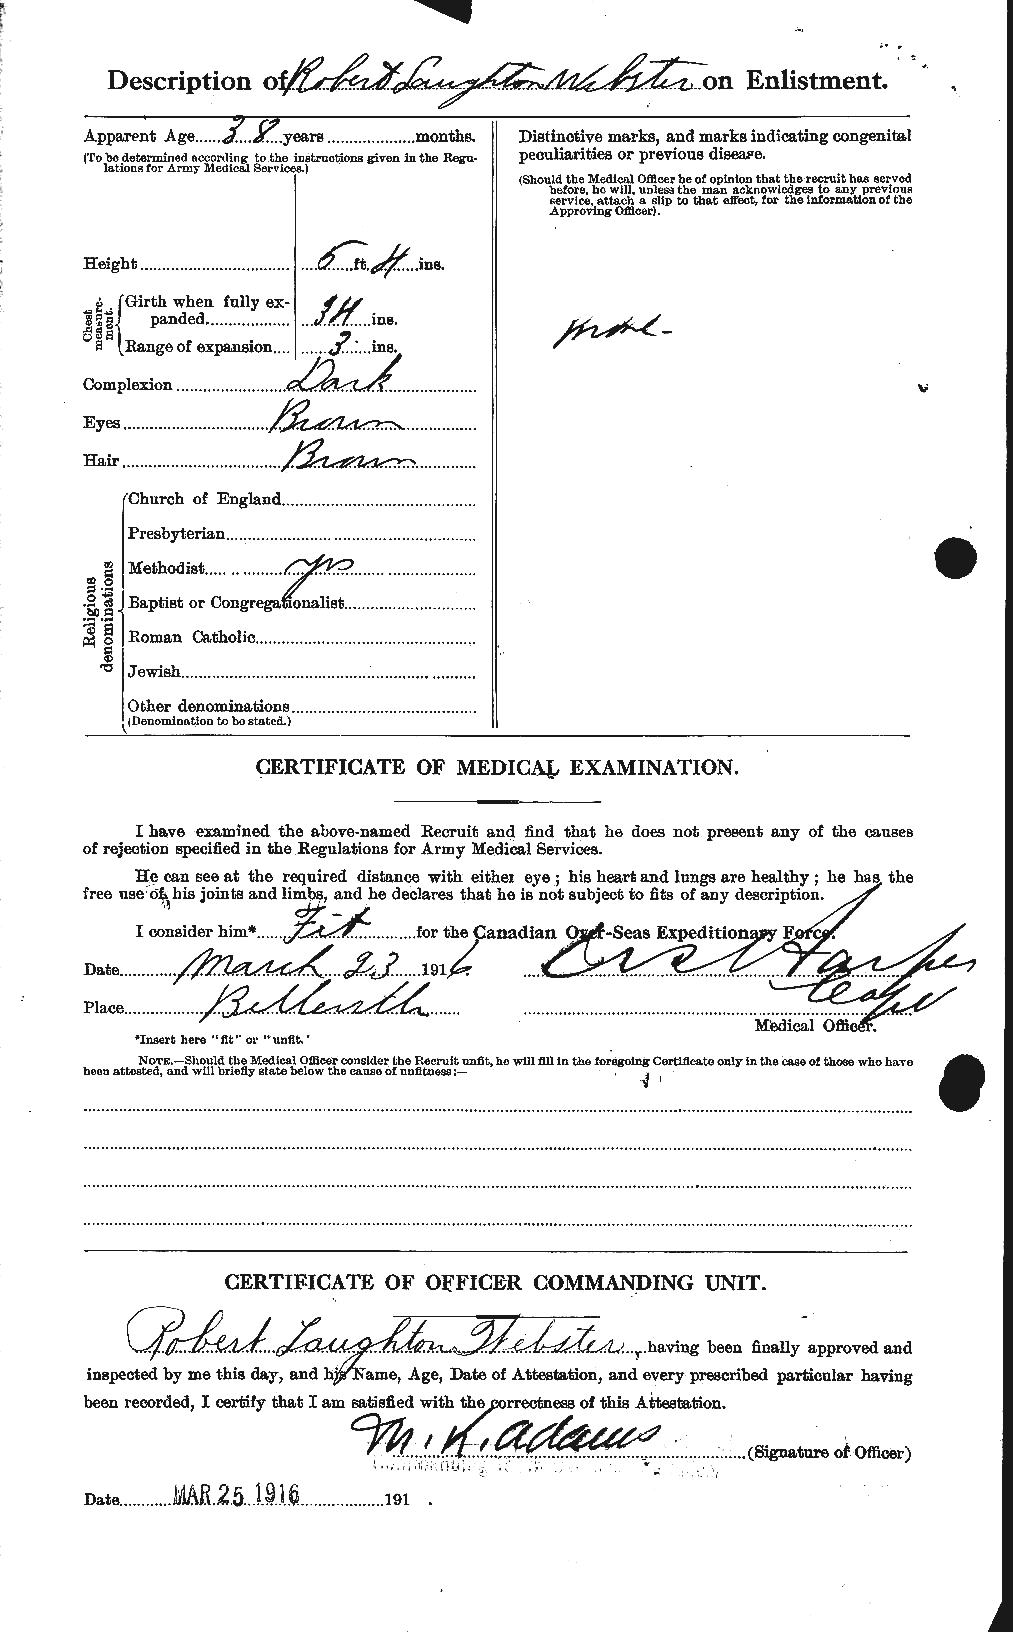 Personnel Records of the First World War - CEF 661966b